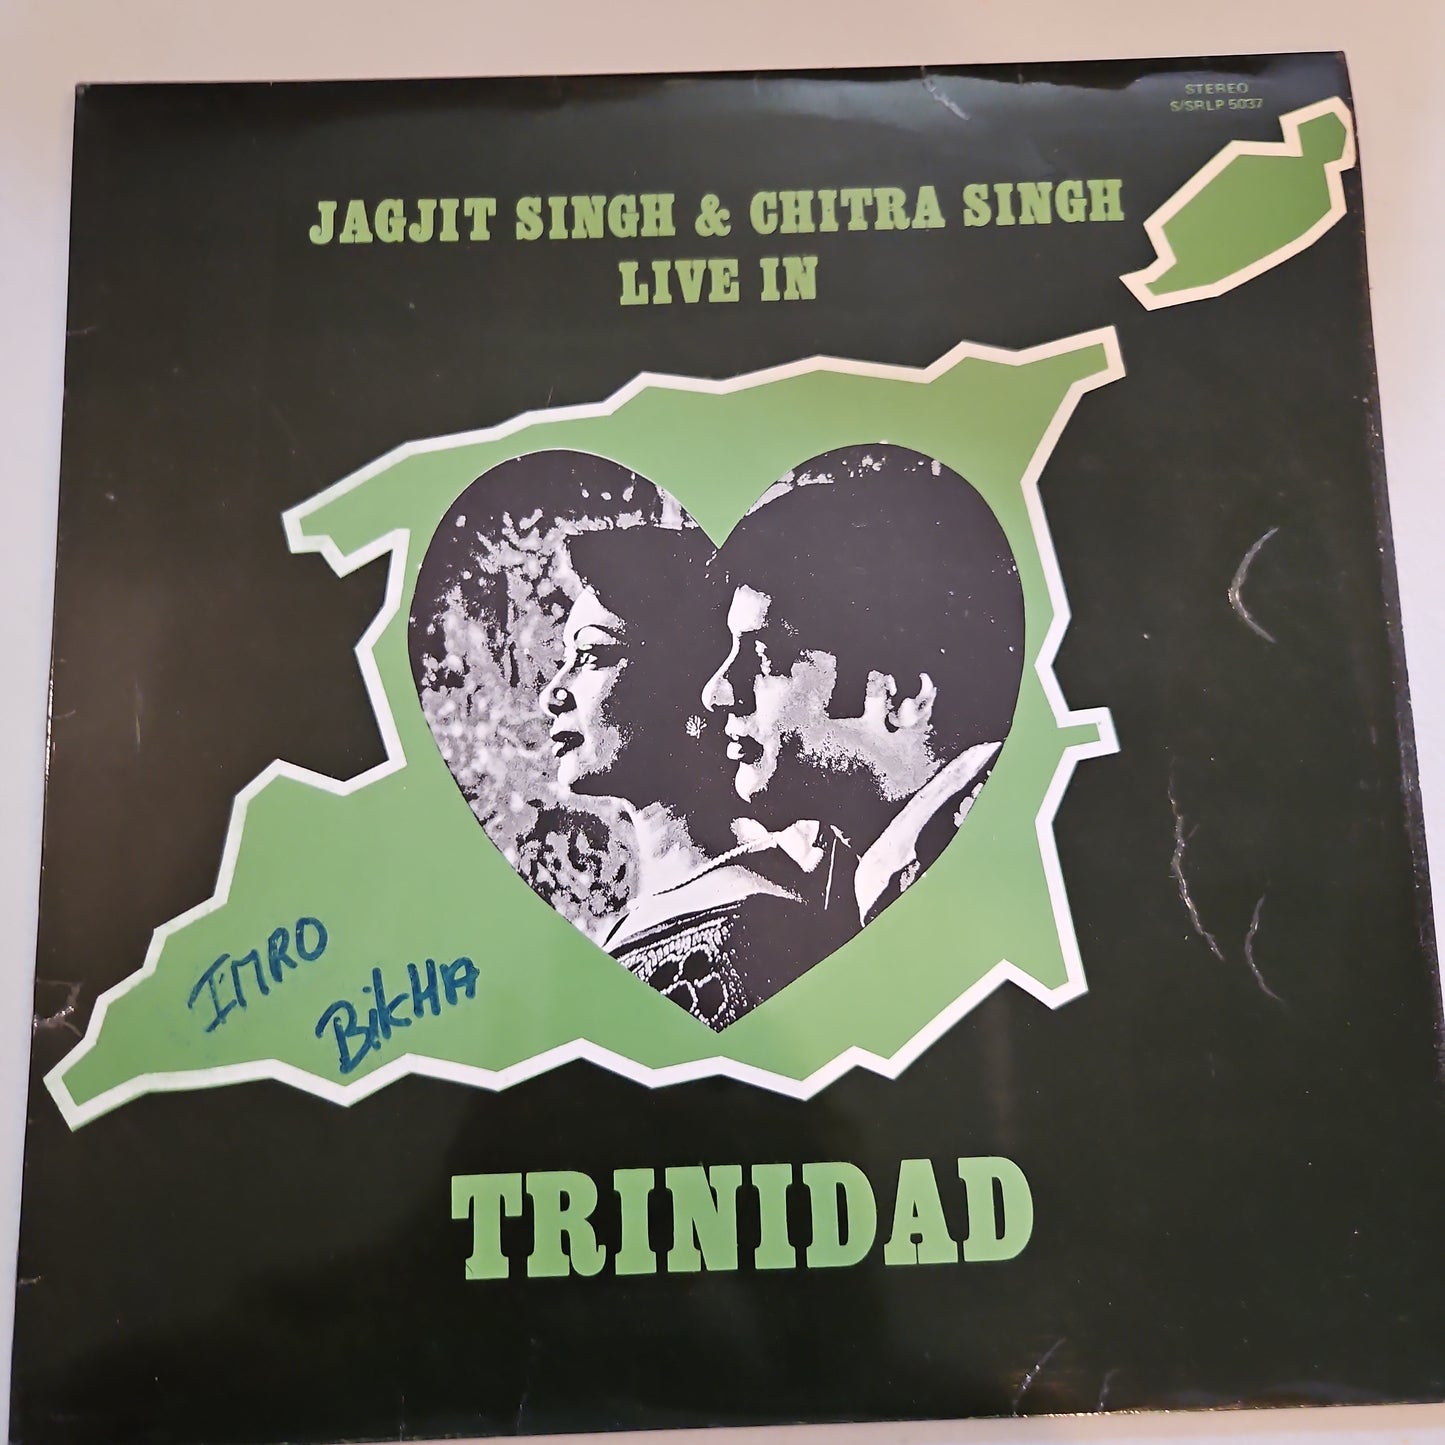 Jagjit Singh and Chitra Singh - Live in trinidad in VG+ condition